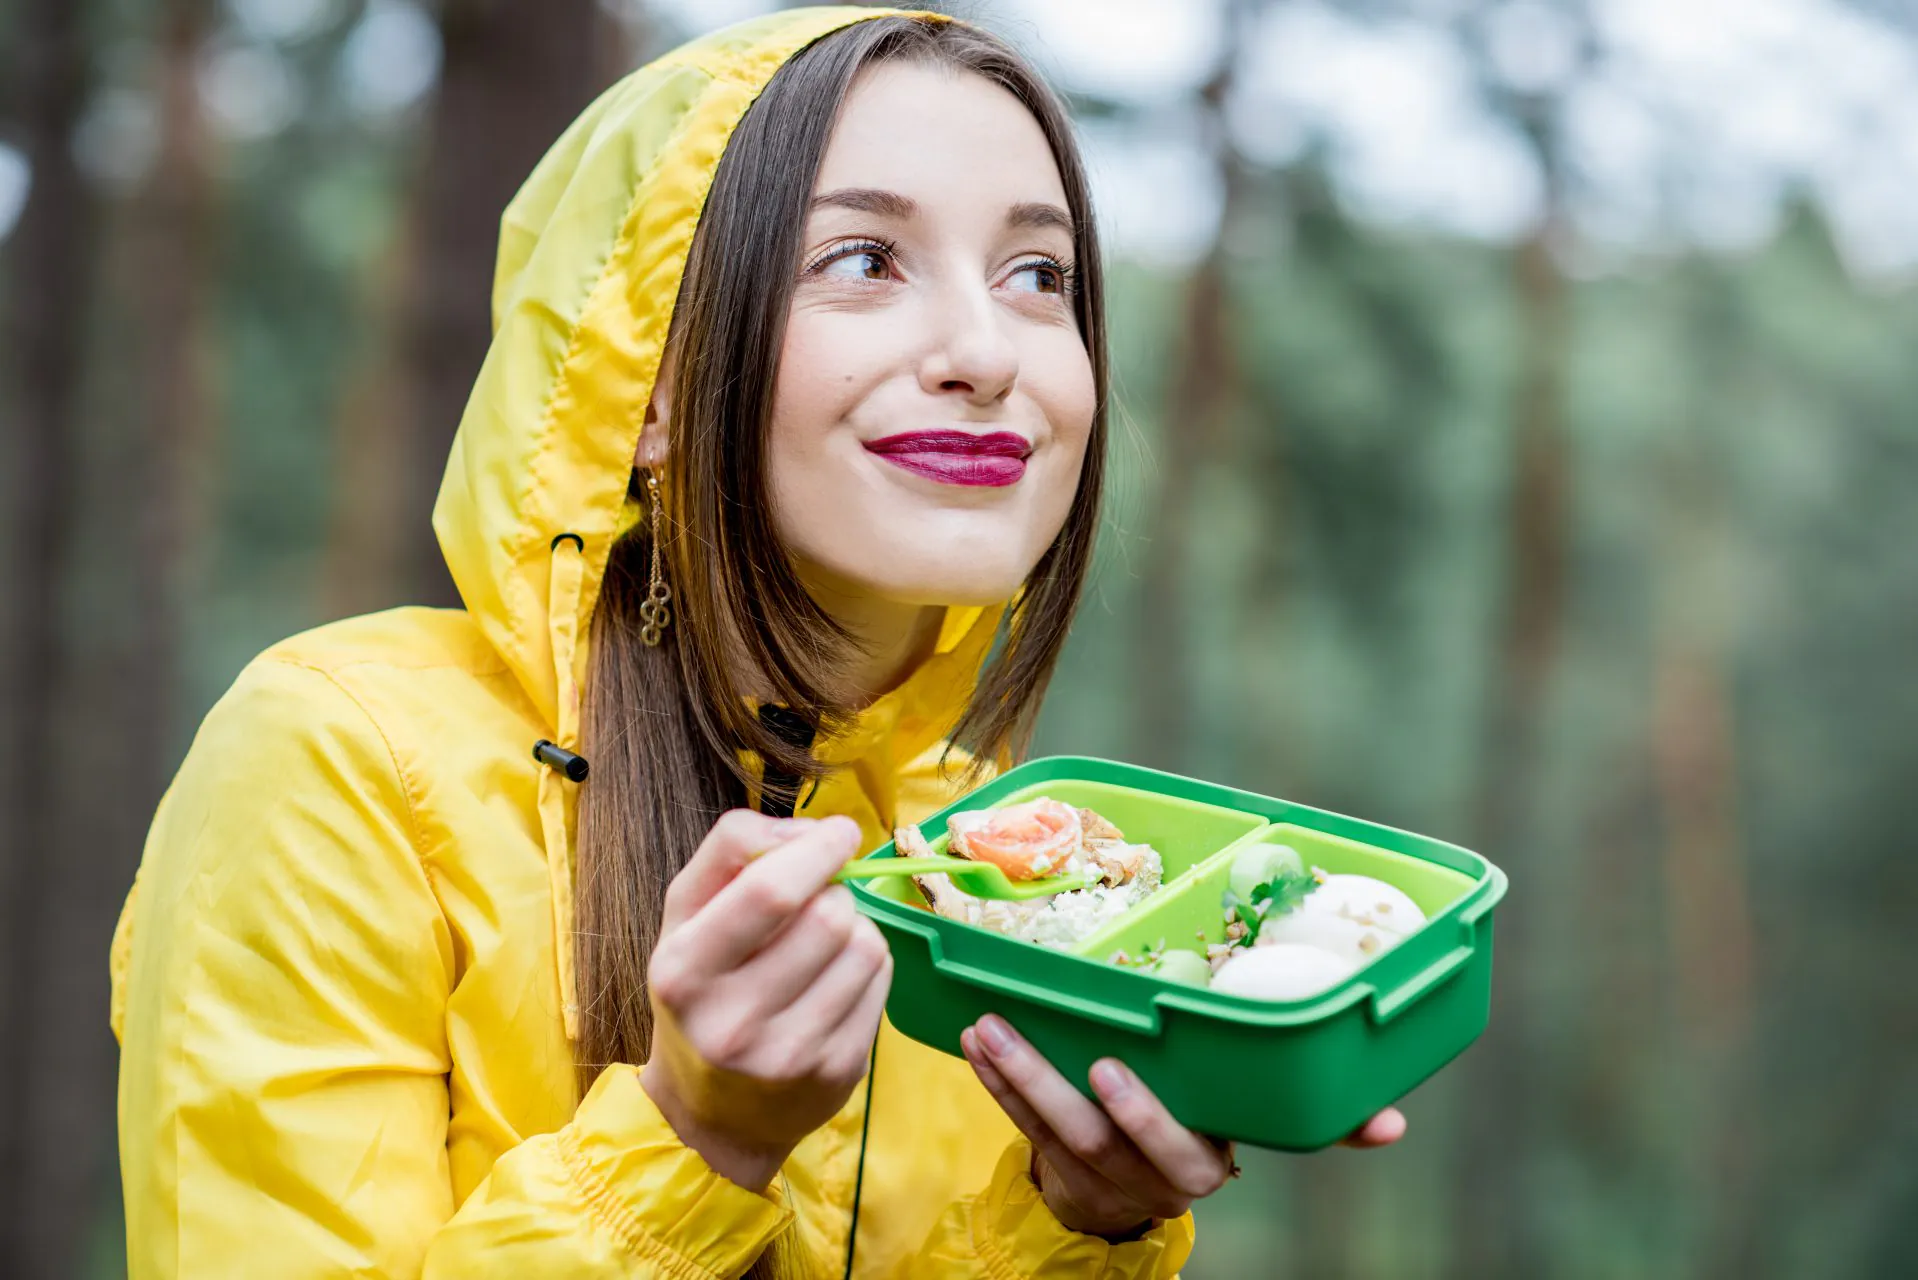 Young,Woman,Having,A,Snack,With,Healthy,Food,In,Lunch